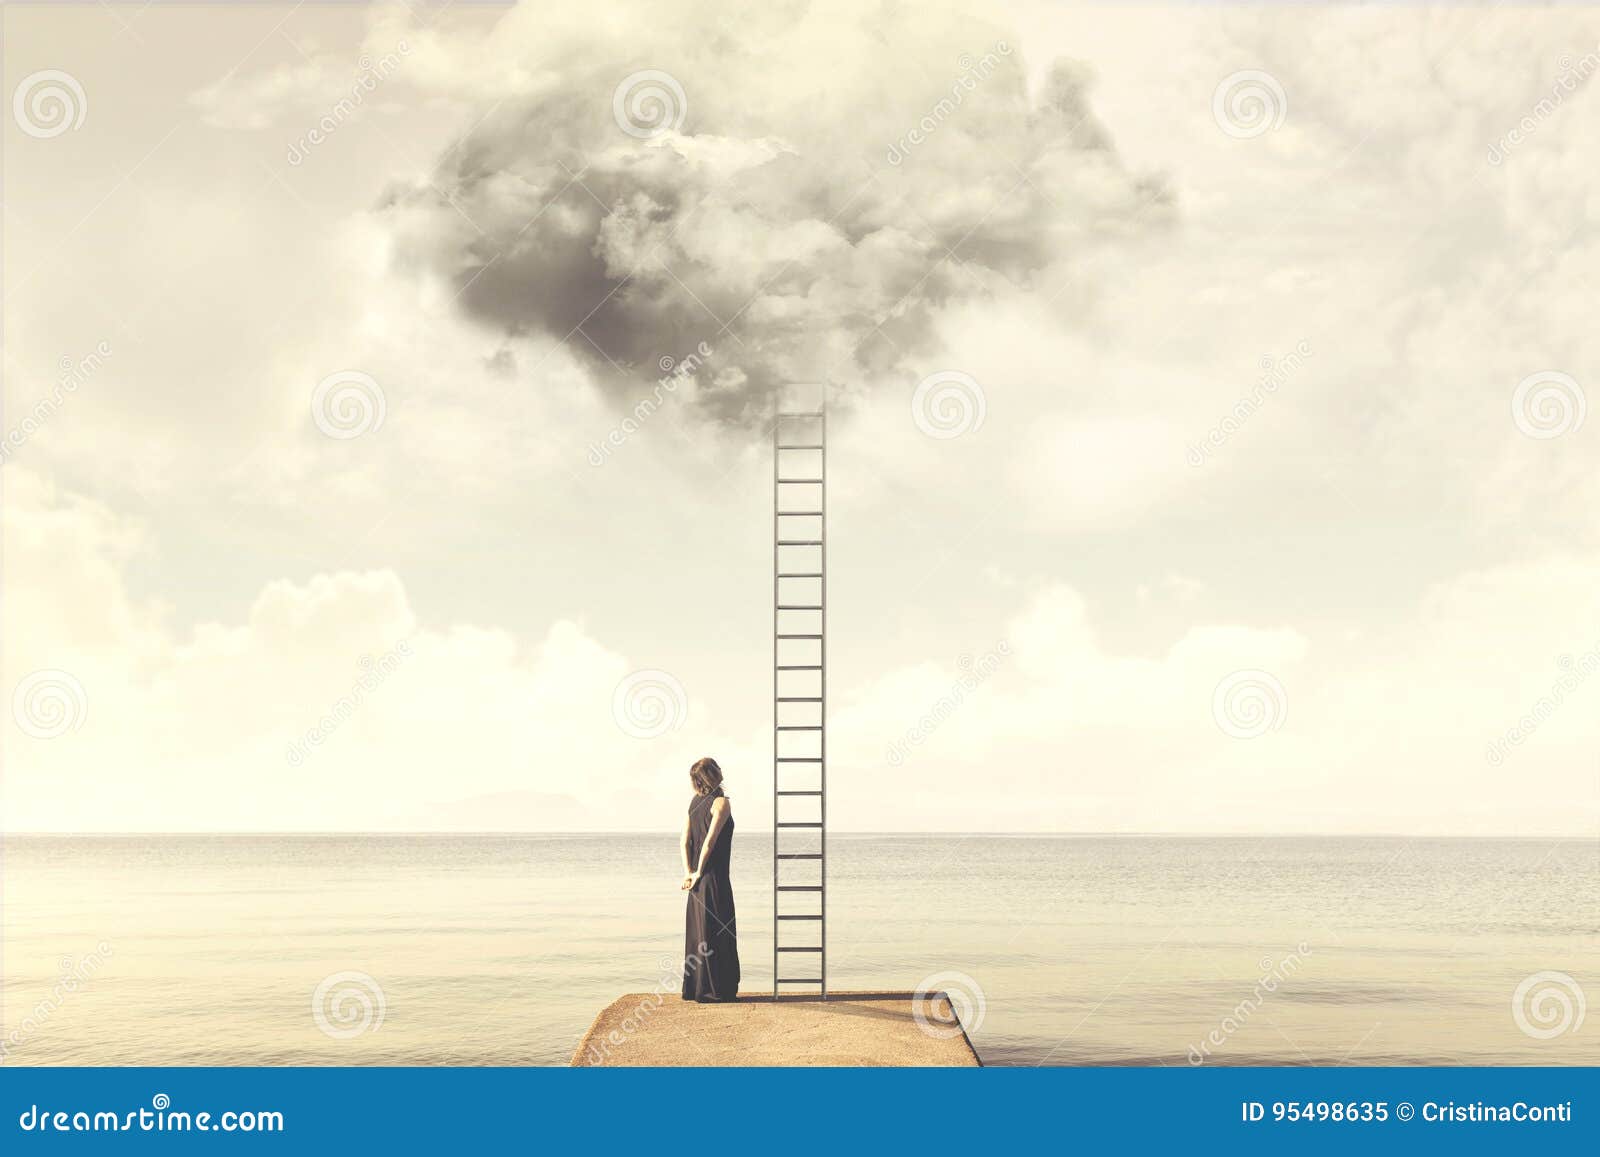 surreal moment of woman climbing an imaginary scale to the clouds